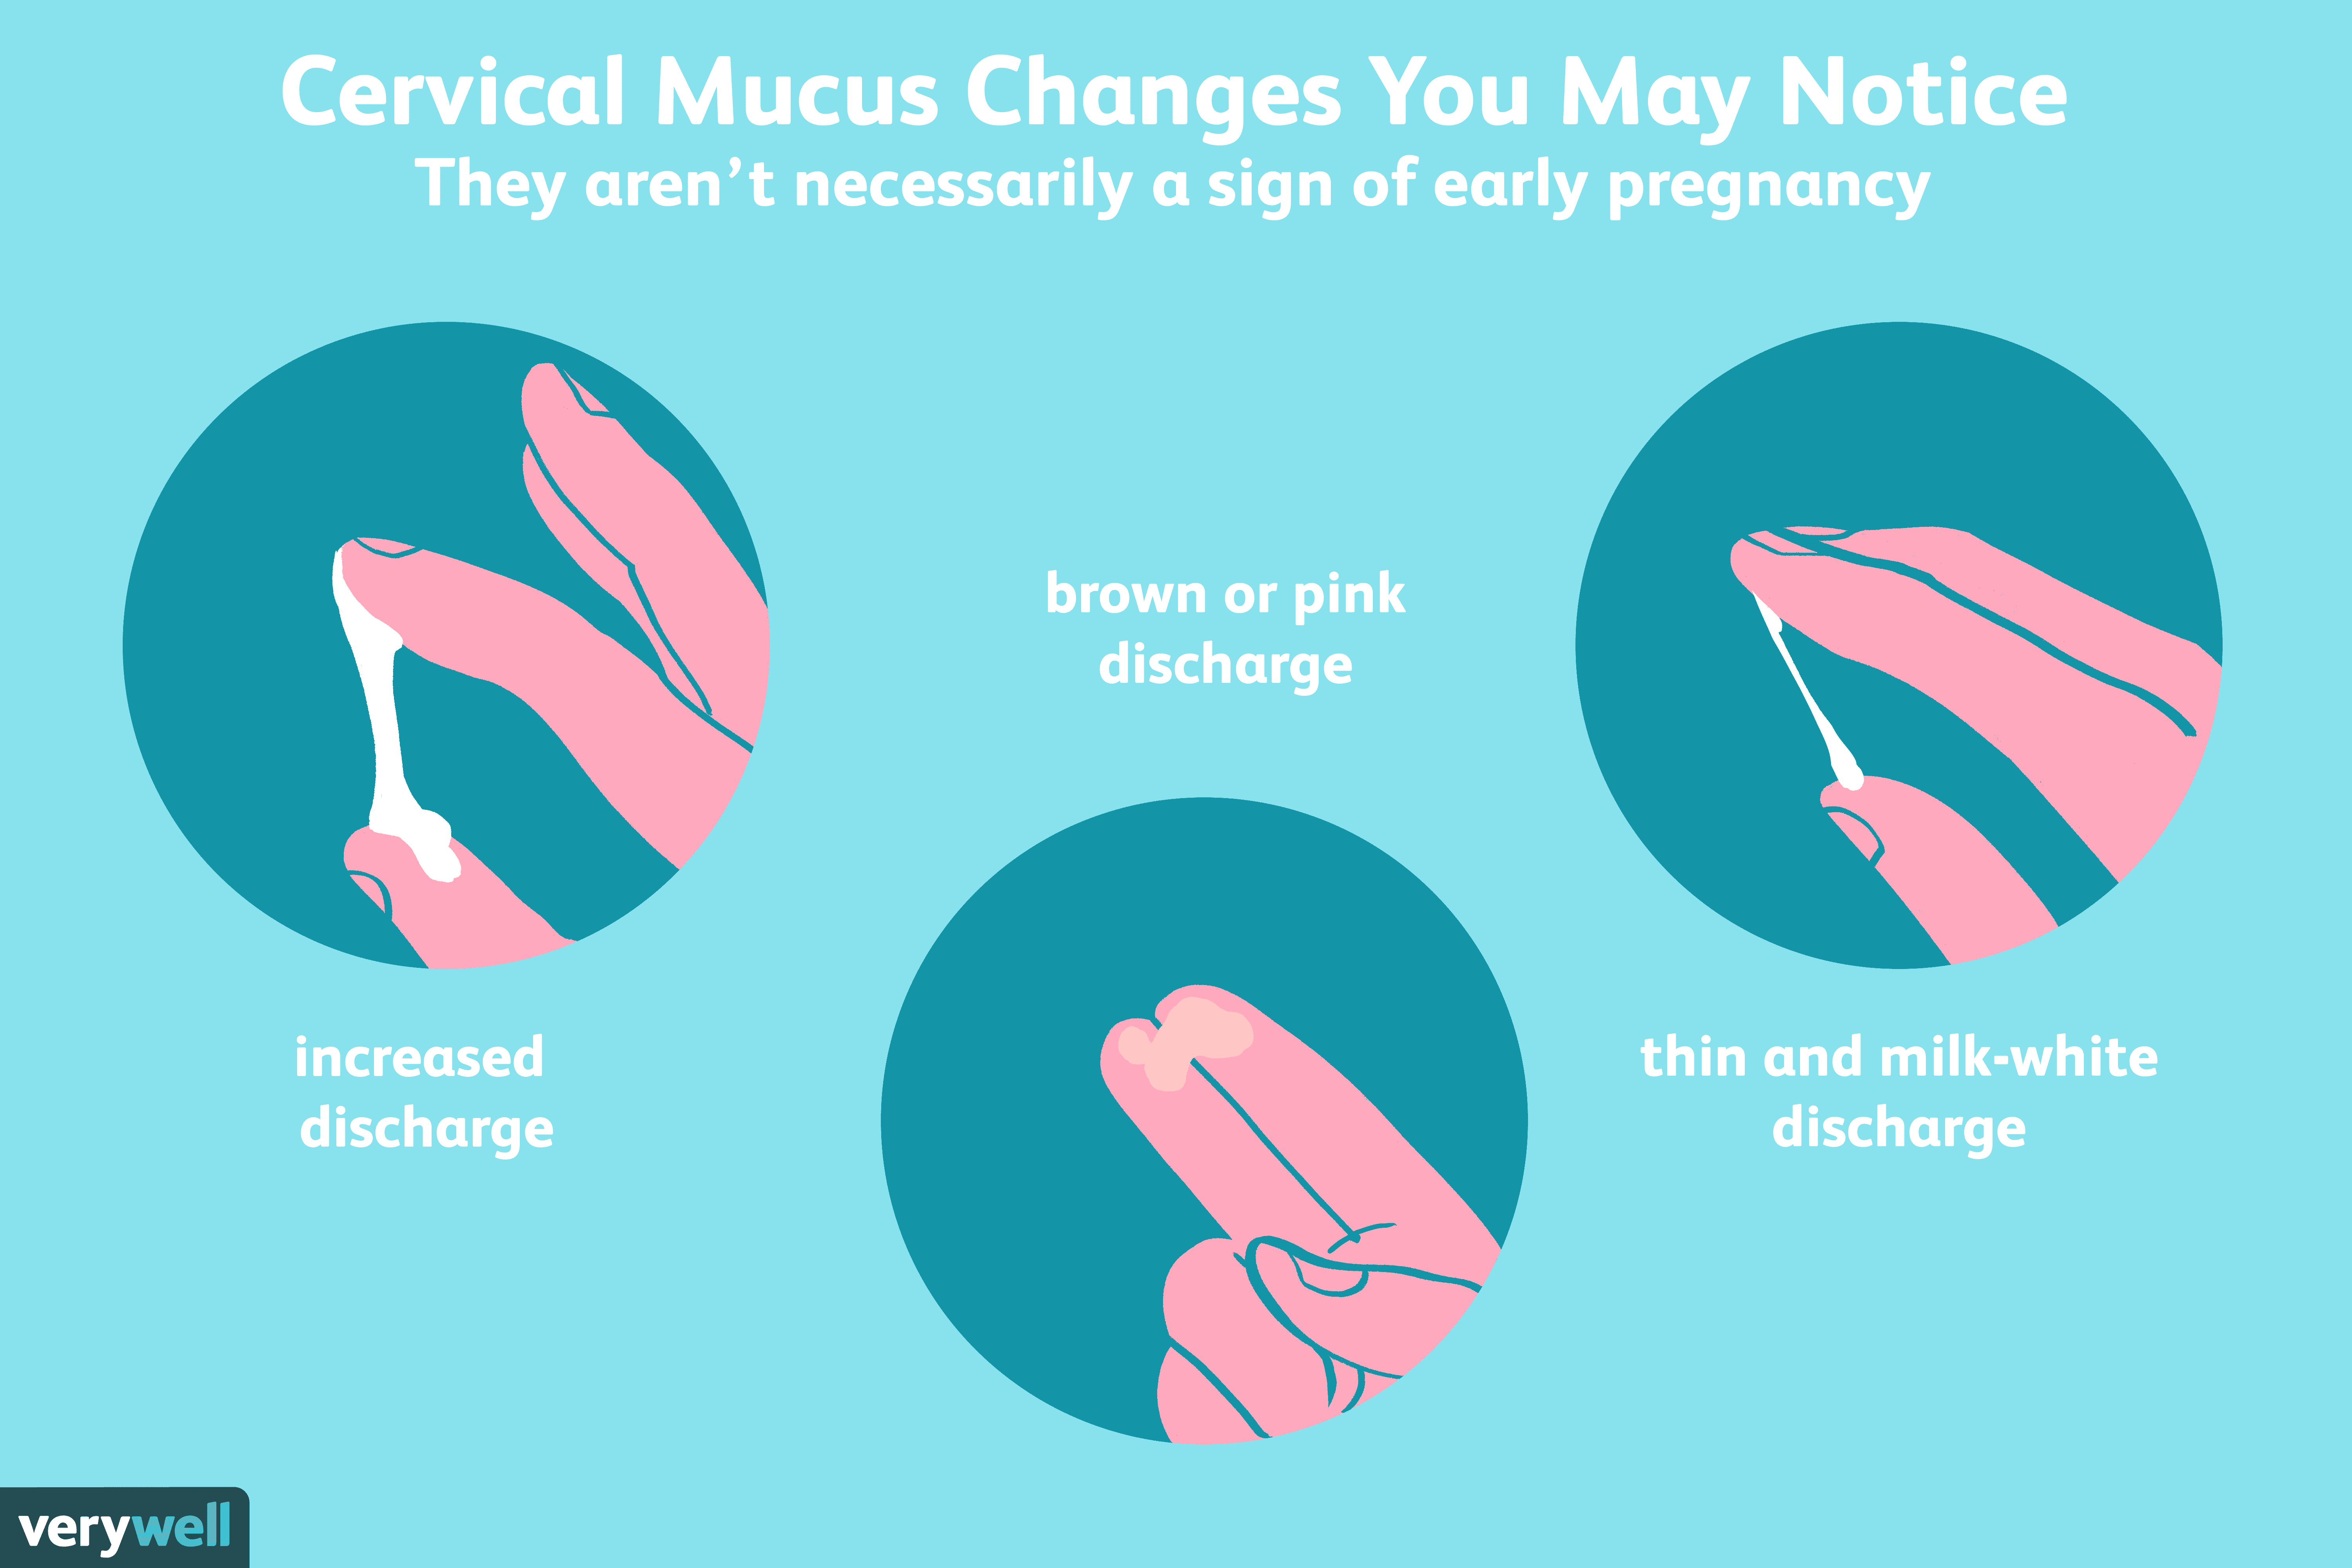 Can Cervical Mucus Help You Detect Early Pregnancy?